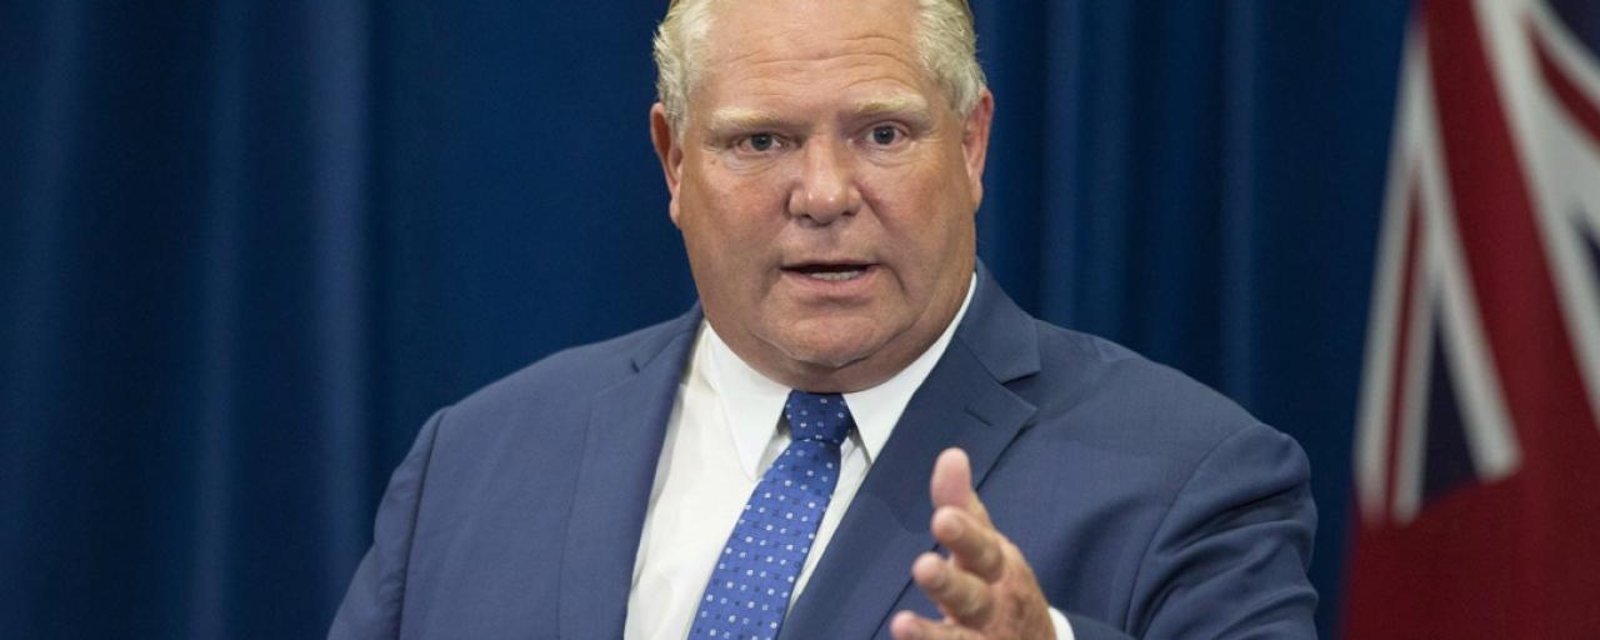 Doug Ford responds to the OHL's decision to ban hitting. 